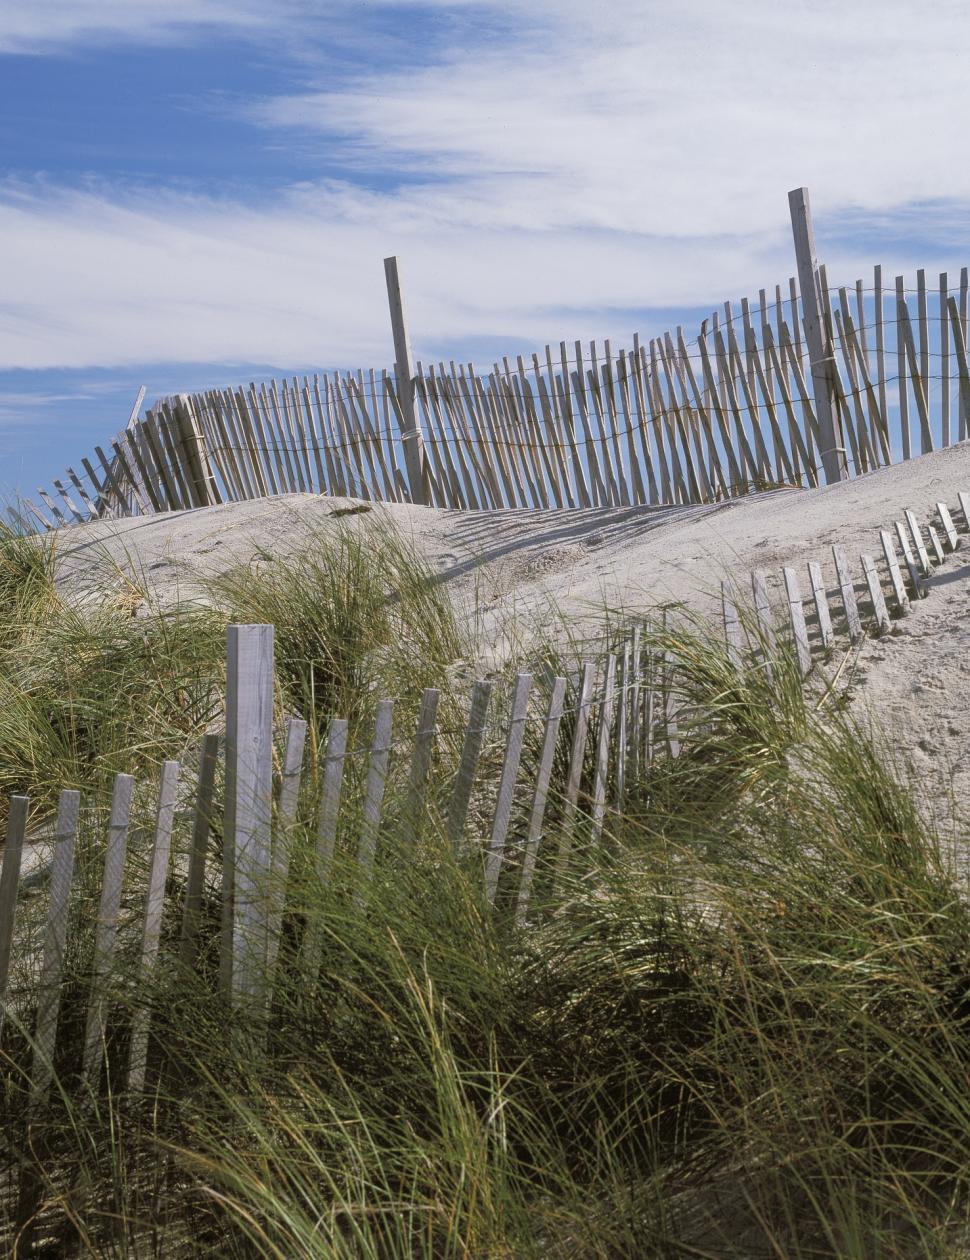 Free Image of Sandy Beach With Fence and Grass 